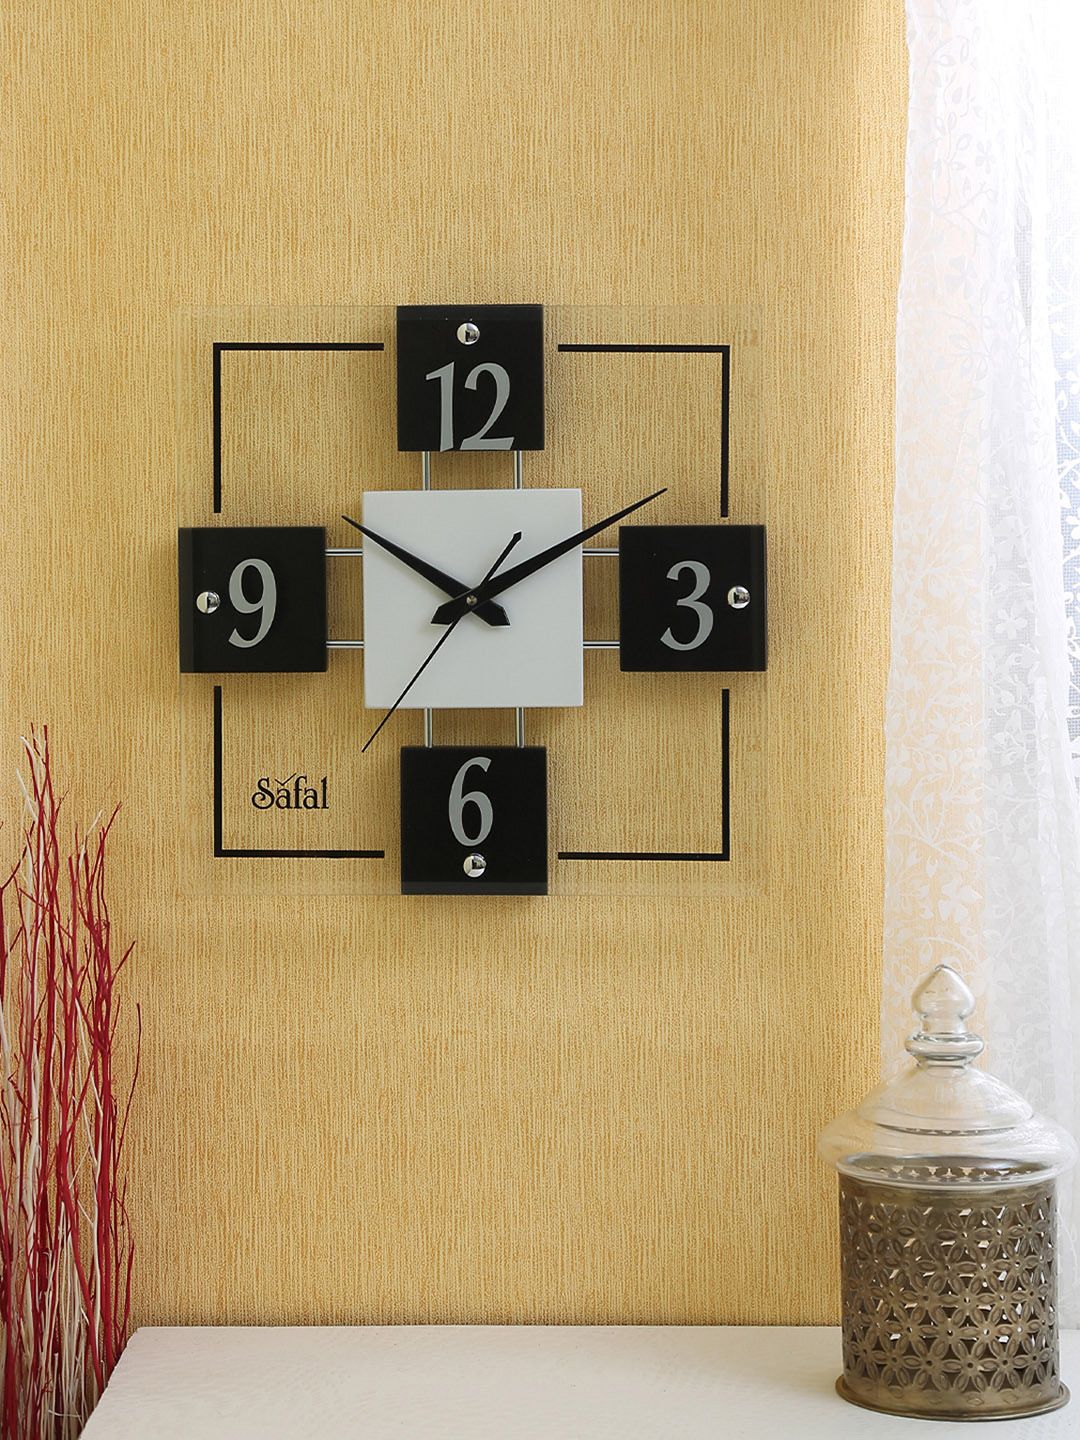 Safal Black & White Dial 31 cm x 31 cm X 6 cm Square Shaped Analogue Wall Clock Price in India